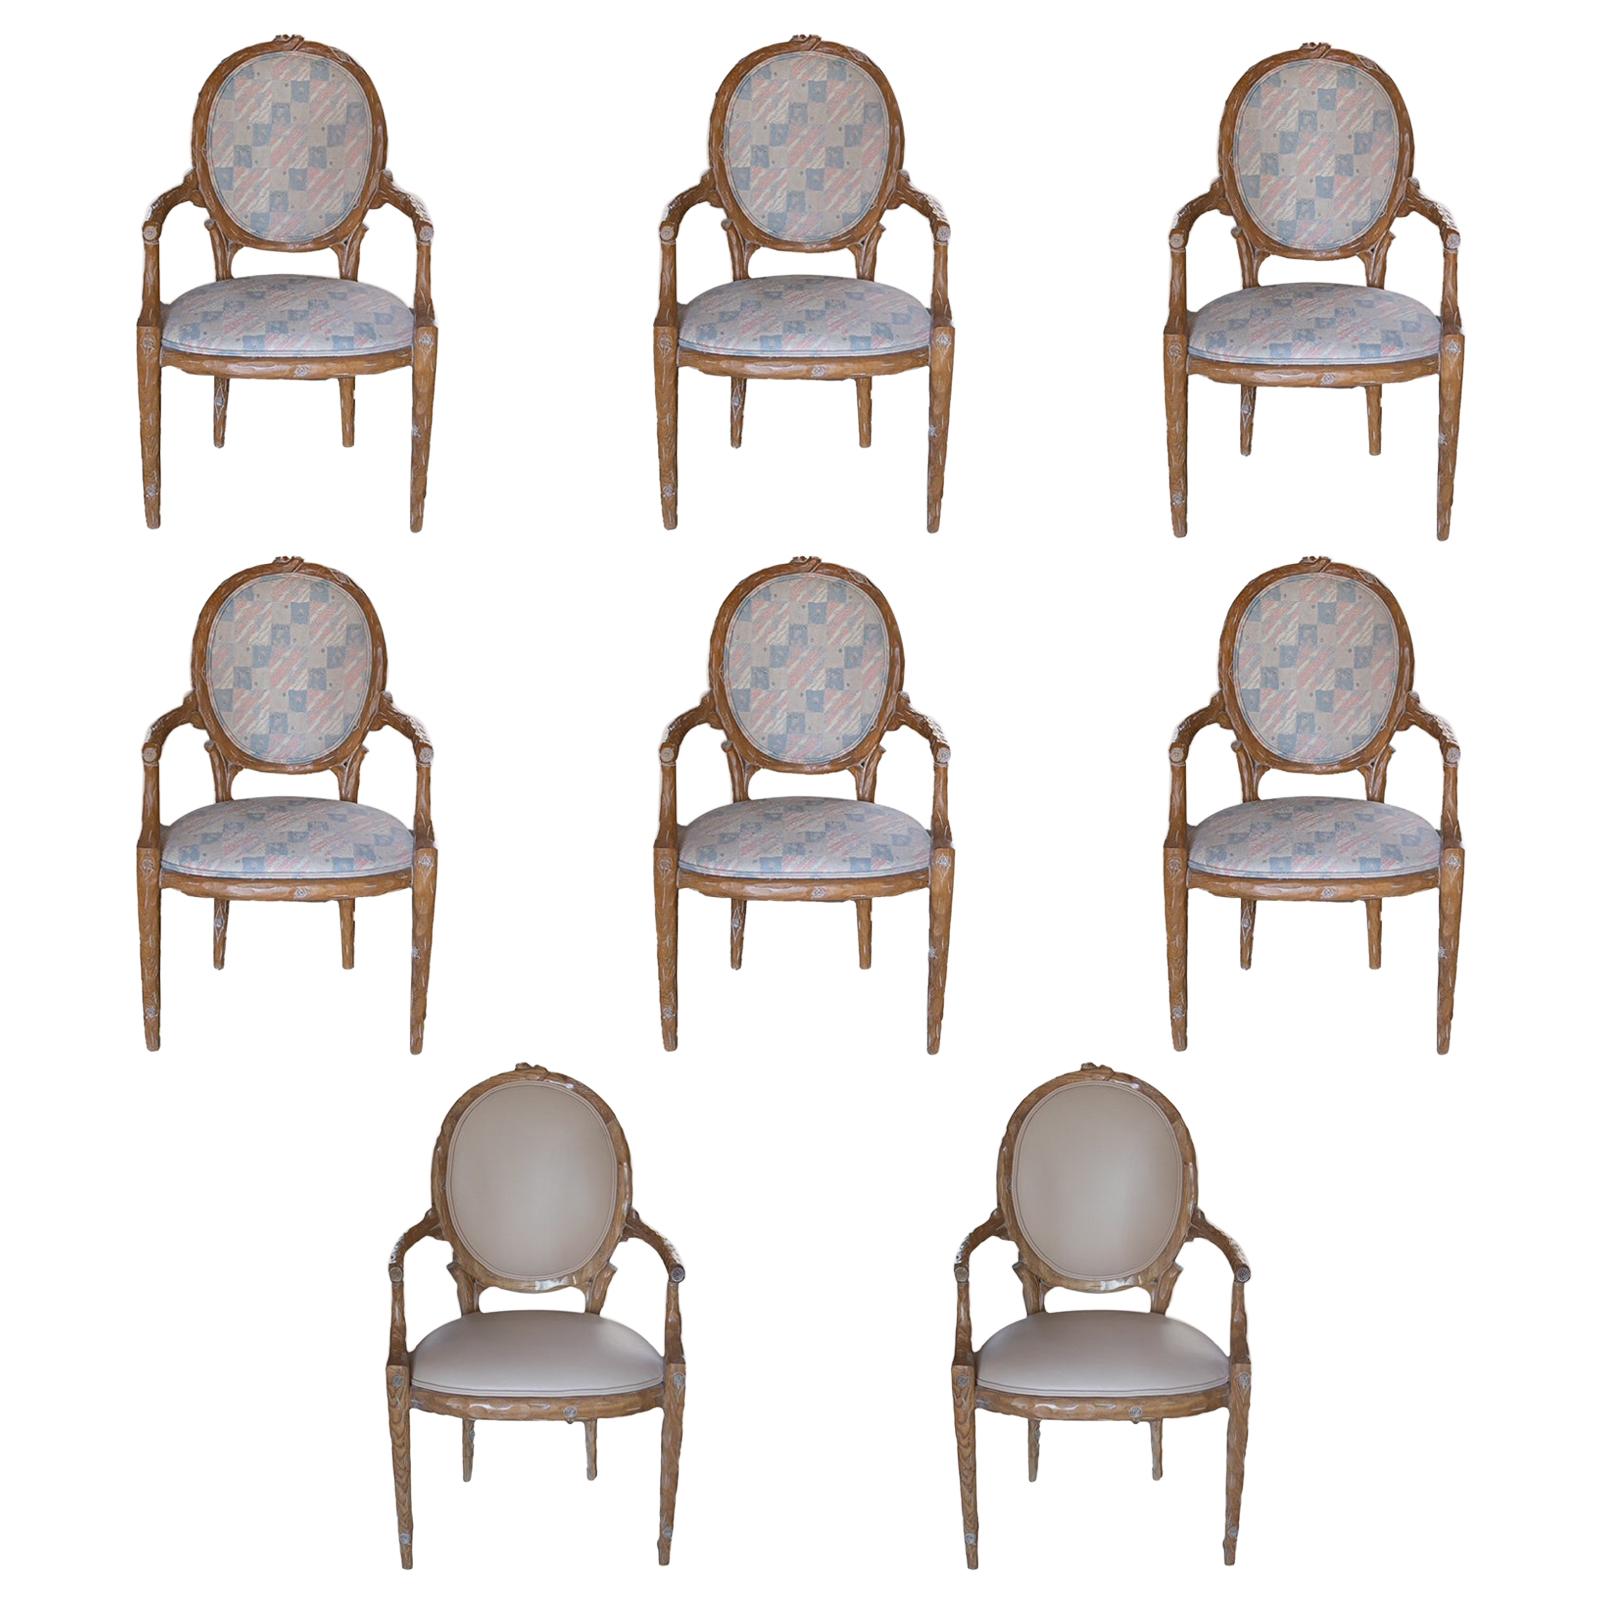 Faux Bois Branch Form Upholstered Armchairs